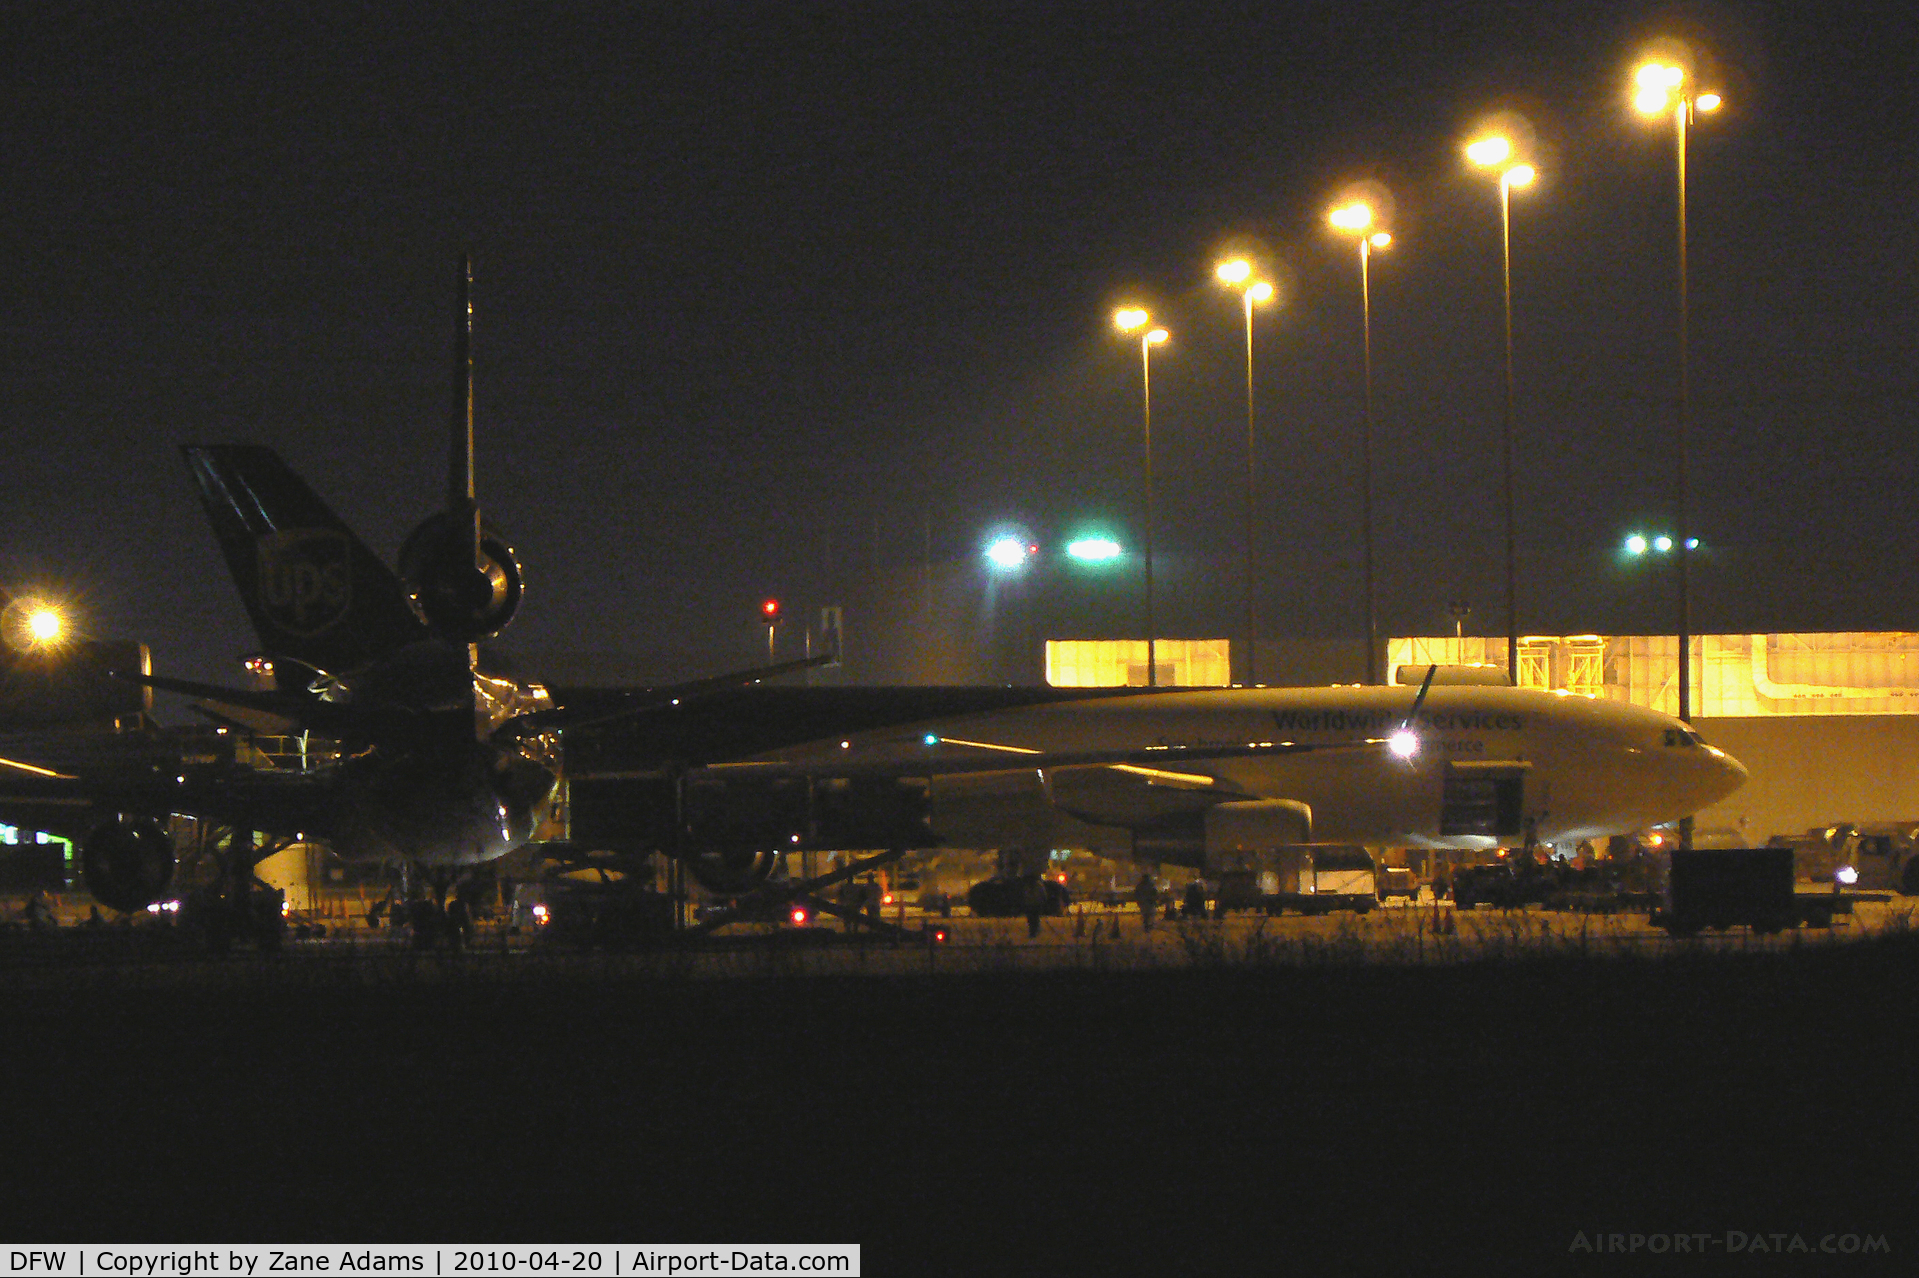 Dallas/fort Worth International Airport (DFW) - Night time UPS ramp activity at DFW airport